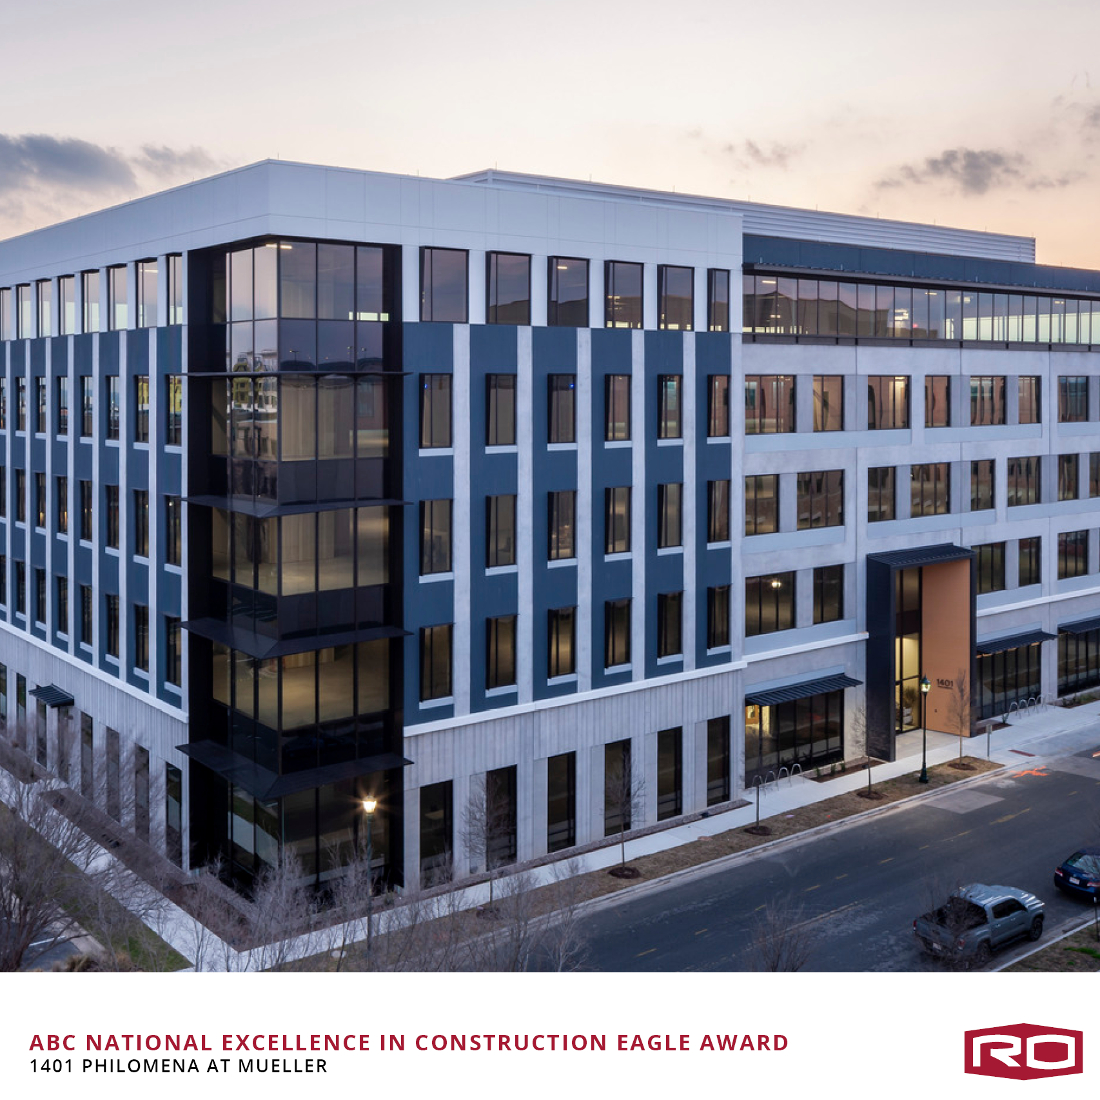 Celebrating Excellence: 1401 Philomena at Mueller Wins ABC National Excellence in Construction Eagle Award